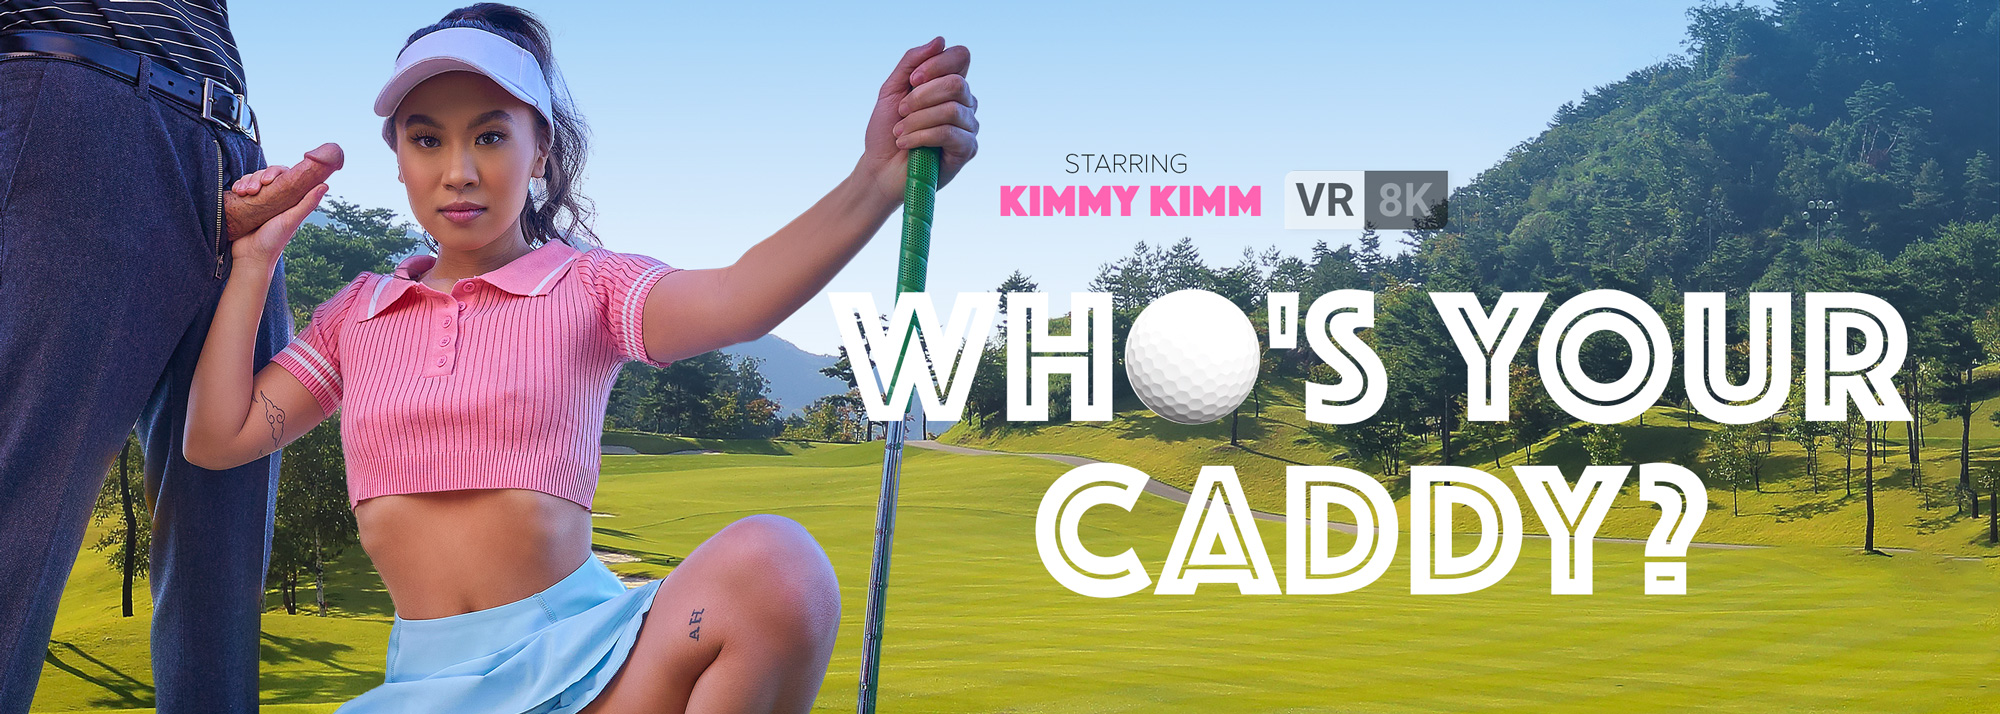 Who's Your Caddy? - VR Porn Video, Starring: Kimmy Kimm